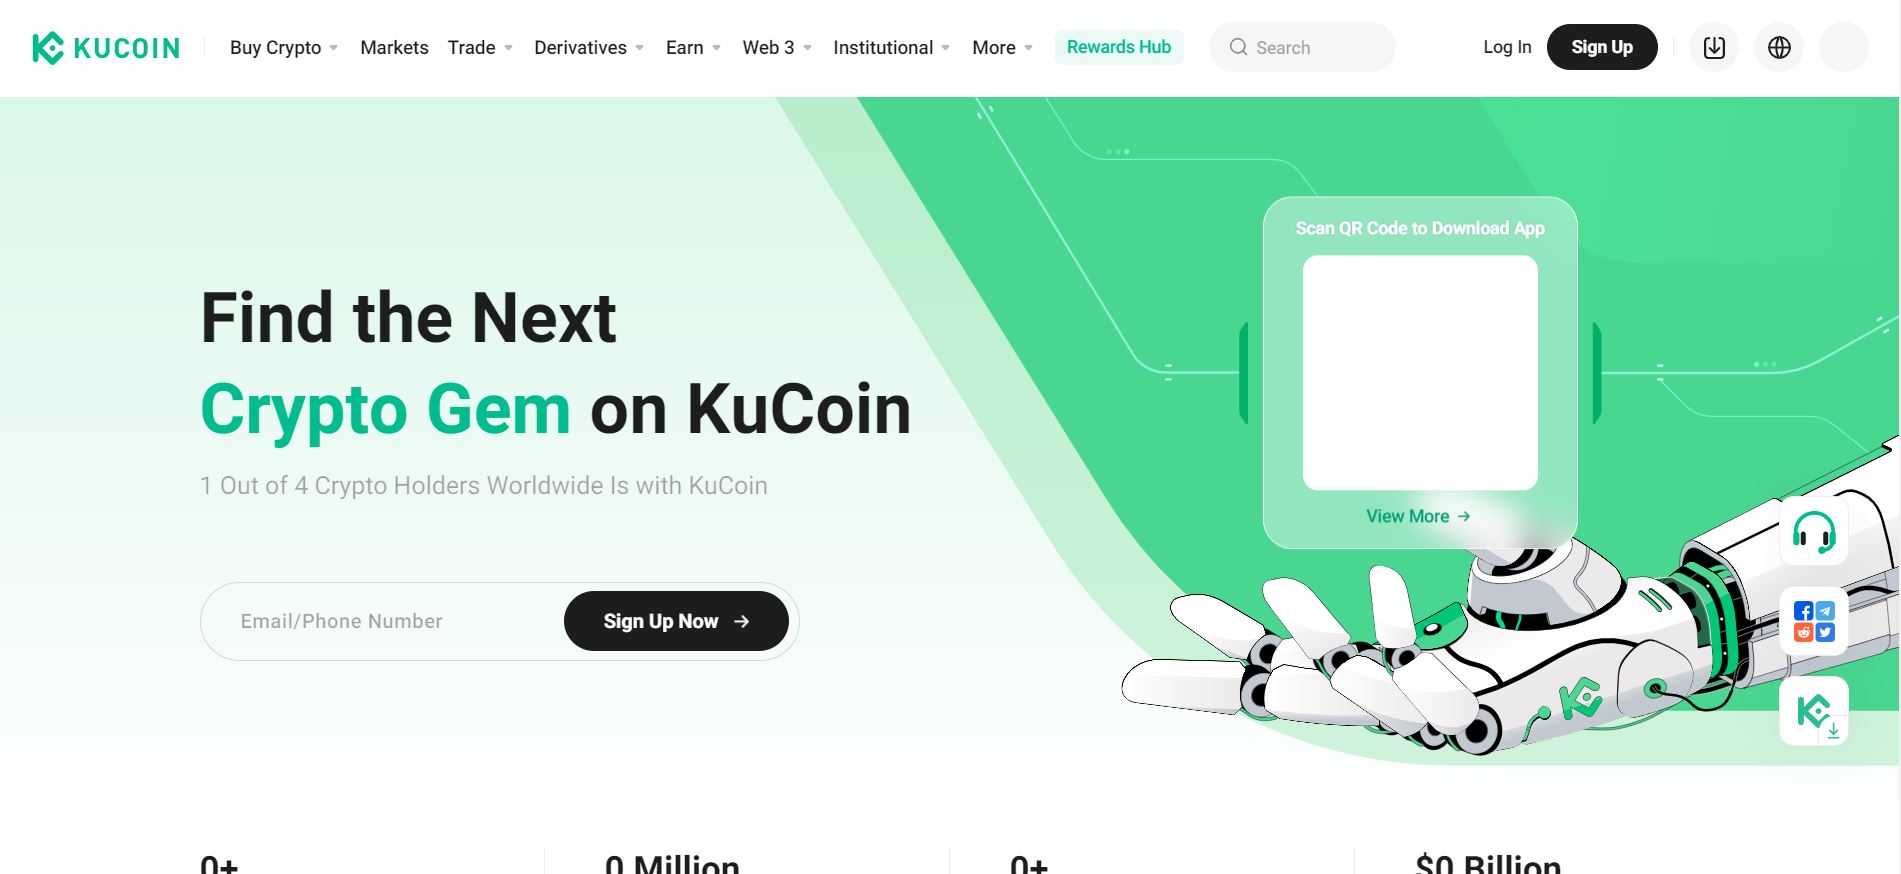 How to transfer Bitcoin SV (BSV) from Kraken to KuCoin? – CoinCheckup Crypto Guides